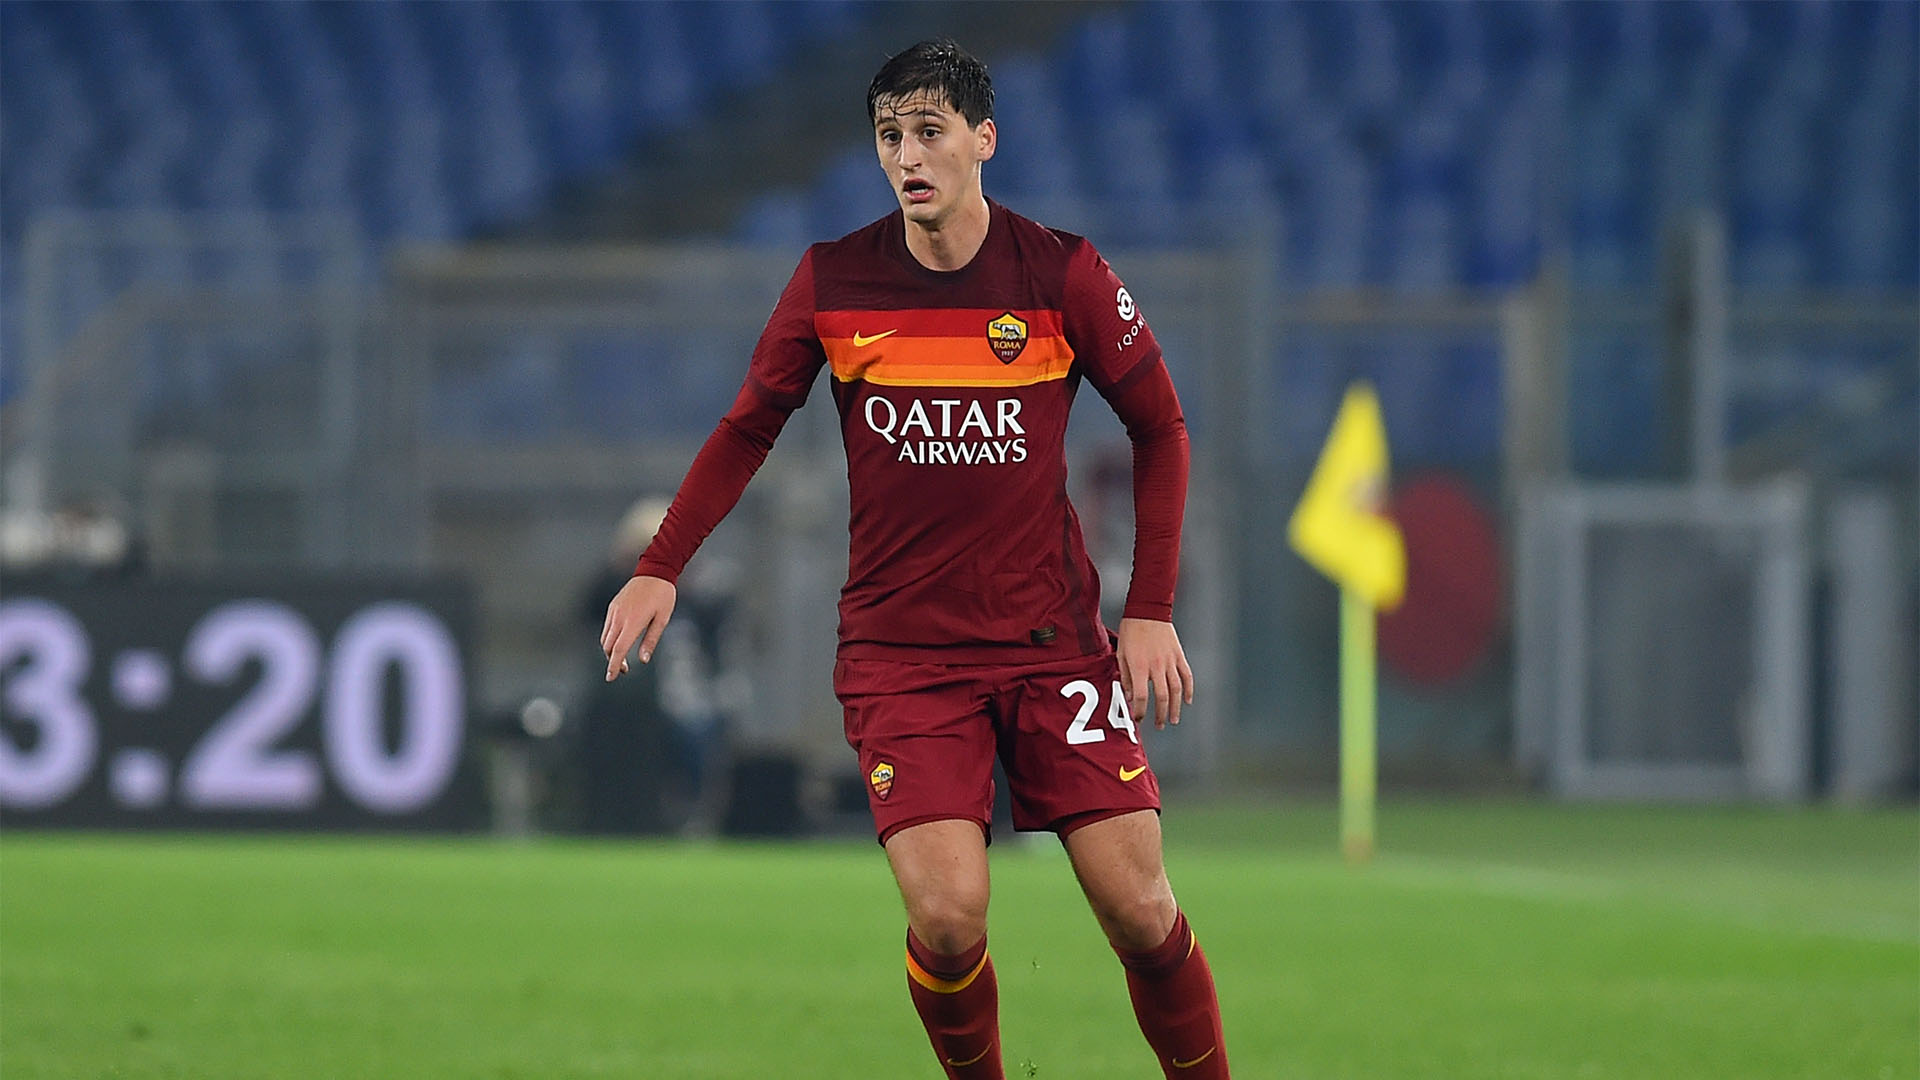 Roma have been hard at work to find a new defender, but they are set to welcome back one of their own before the start of the January window, Kumbulla.